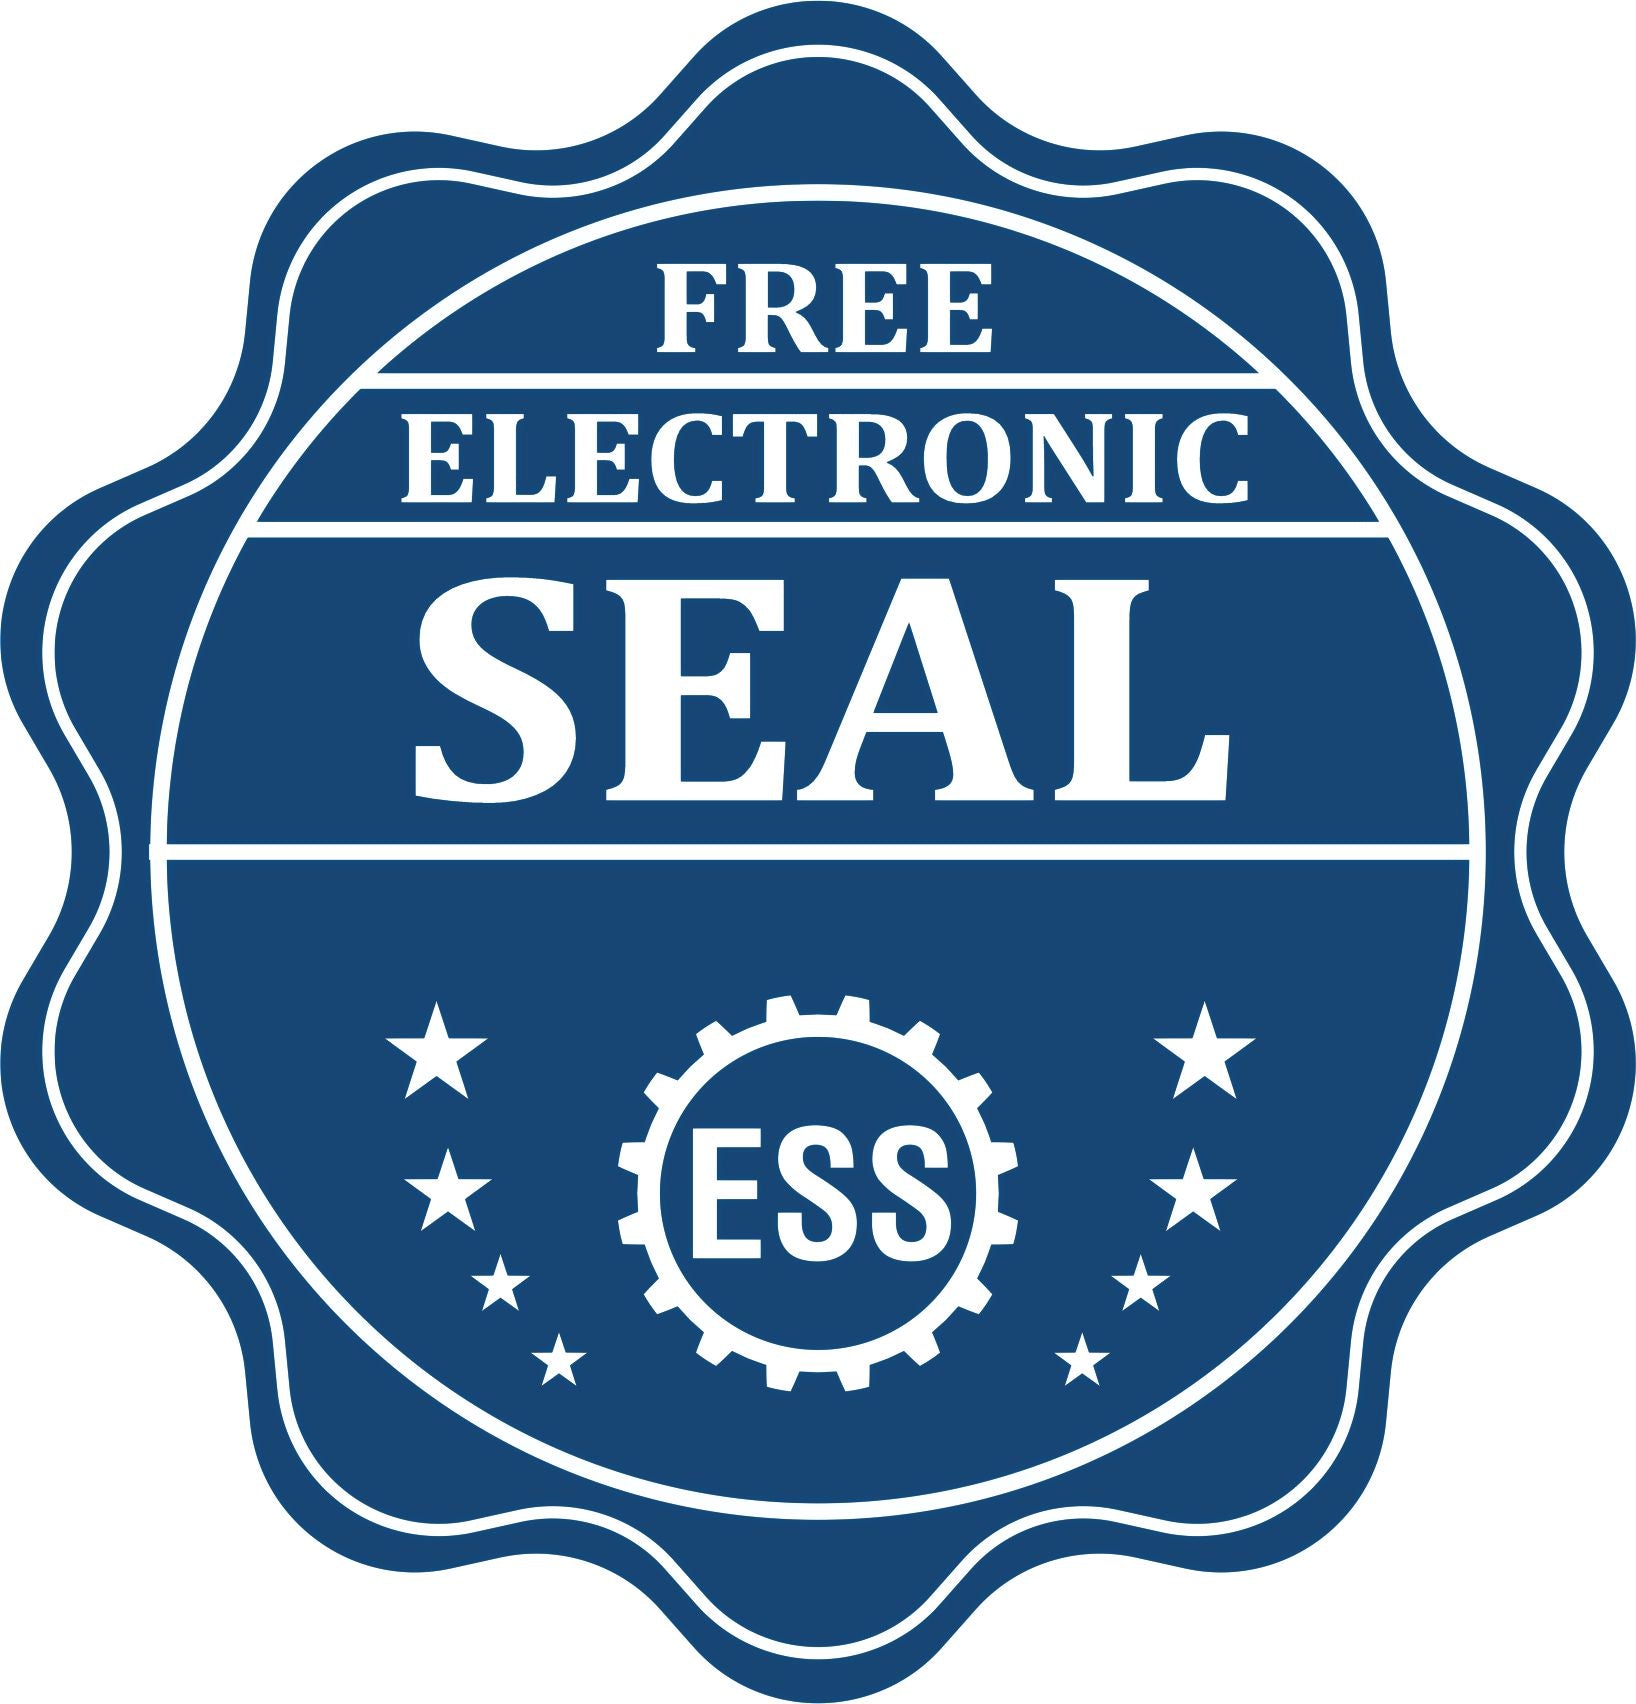 A badge showing a free electronic seal for the Heavy Duty Cast Iron Indiana Land Surveyor Seal Embosser with stars and the ESS gear on the emblem.